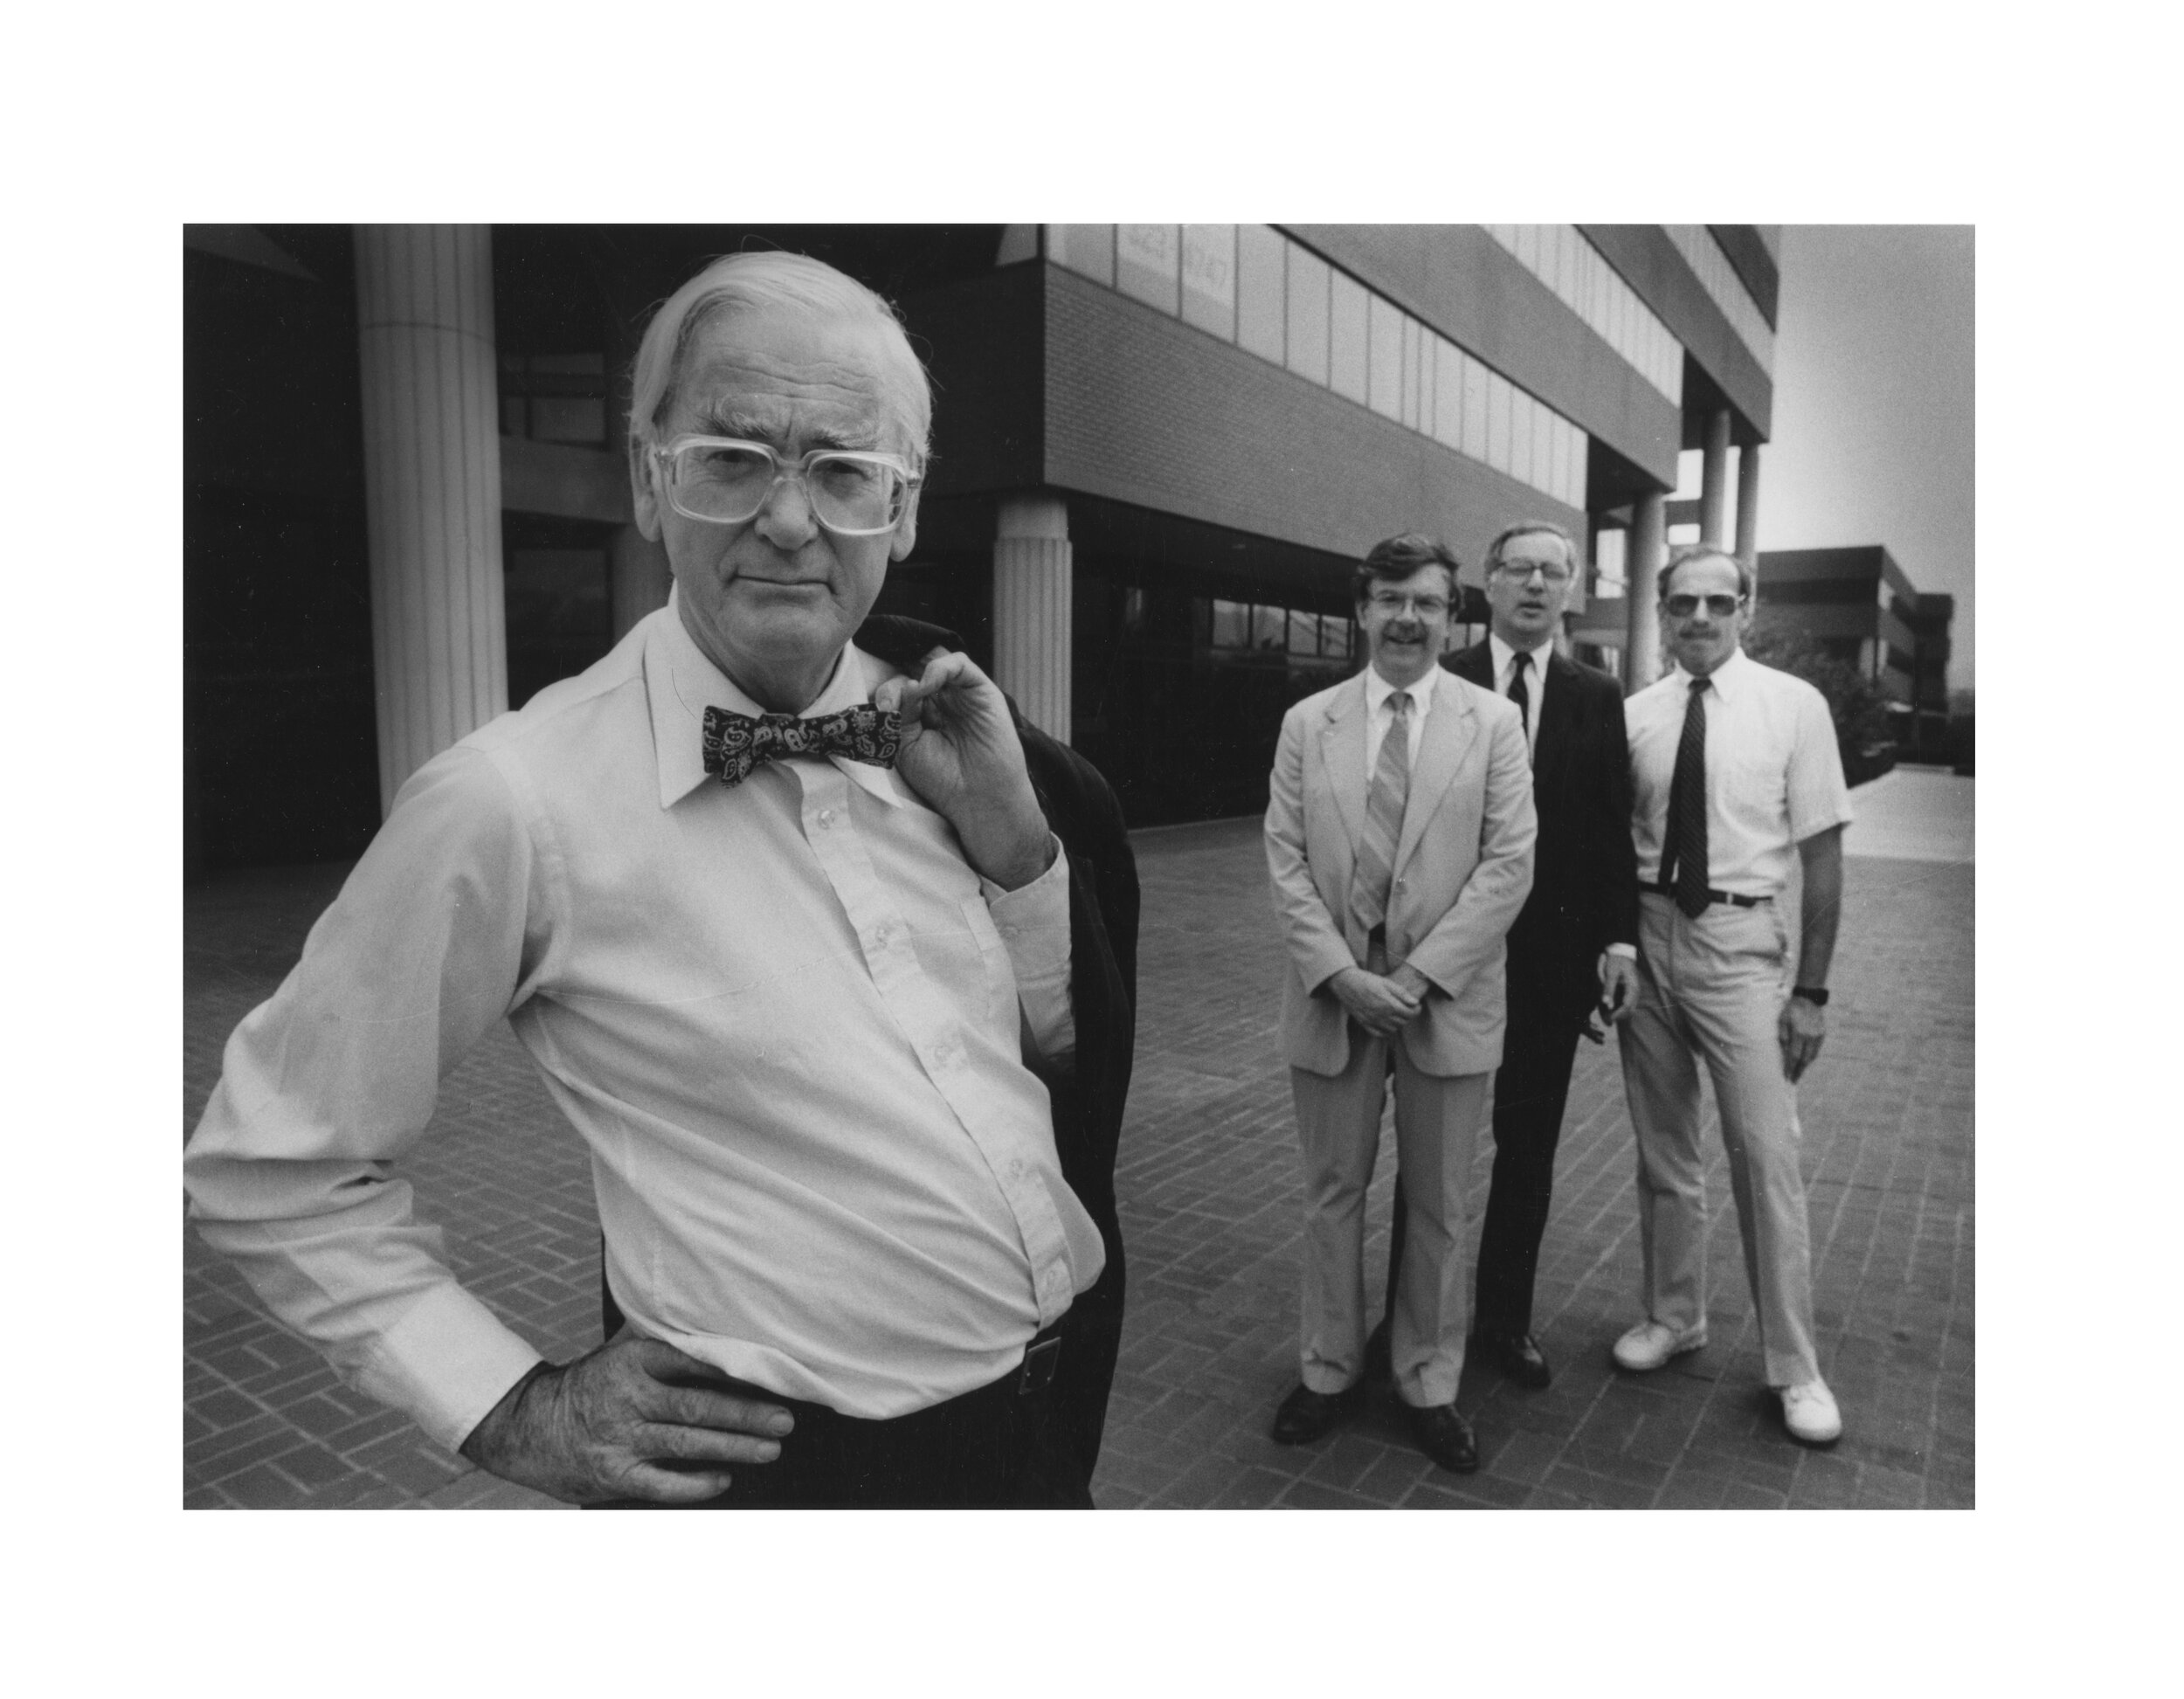 David with his partners Ray Gindroz, Don Carter, and James Goldman (Copy)